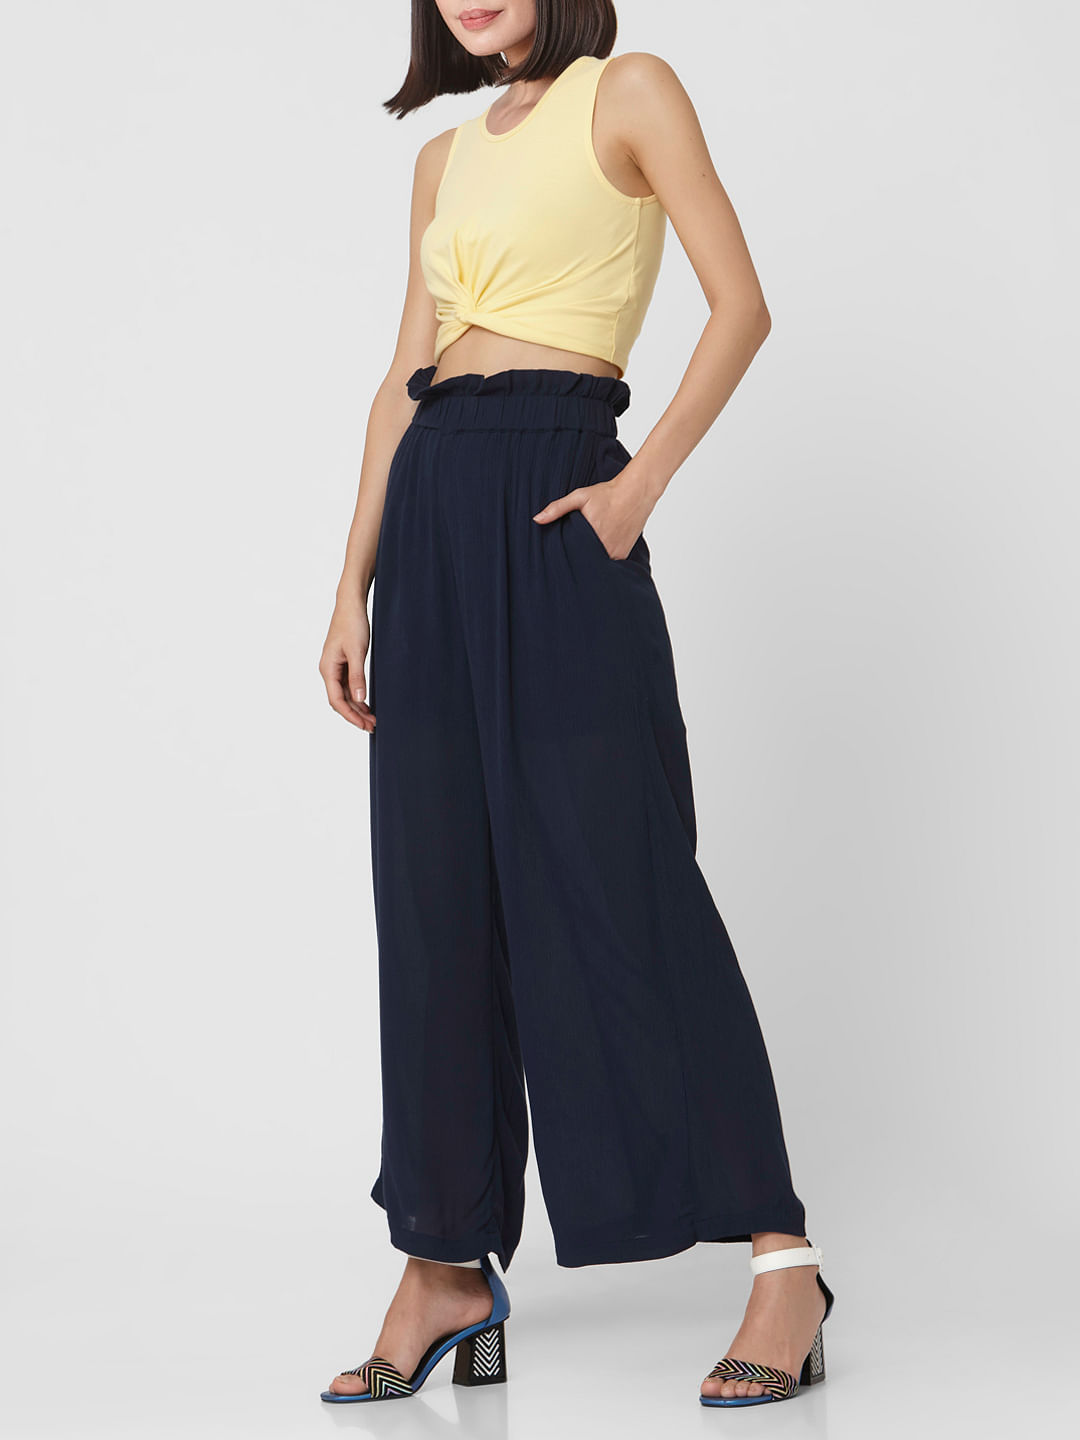 Womens Clothing Trousers Blue Siyu Trouser in Dark Blue Slacks and Chinos Wide-leg and palazzo trousers 